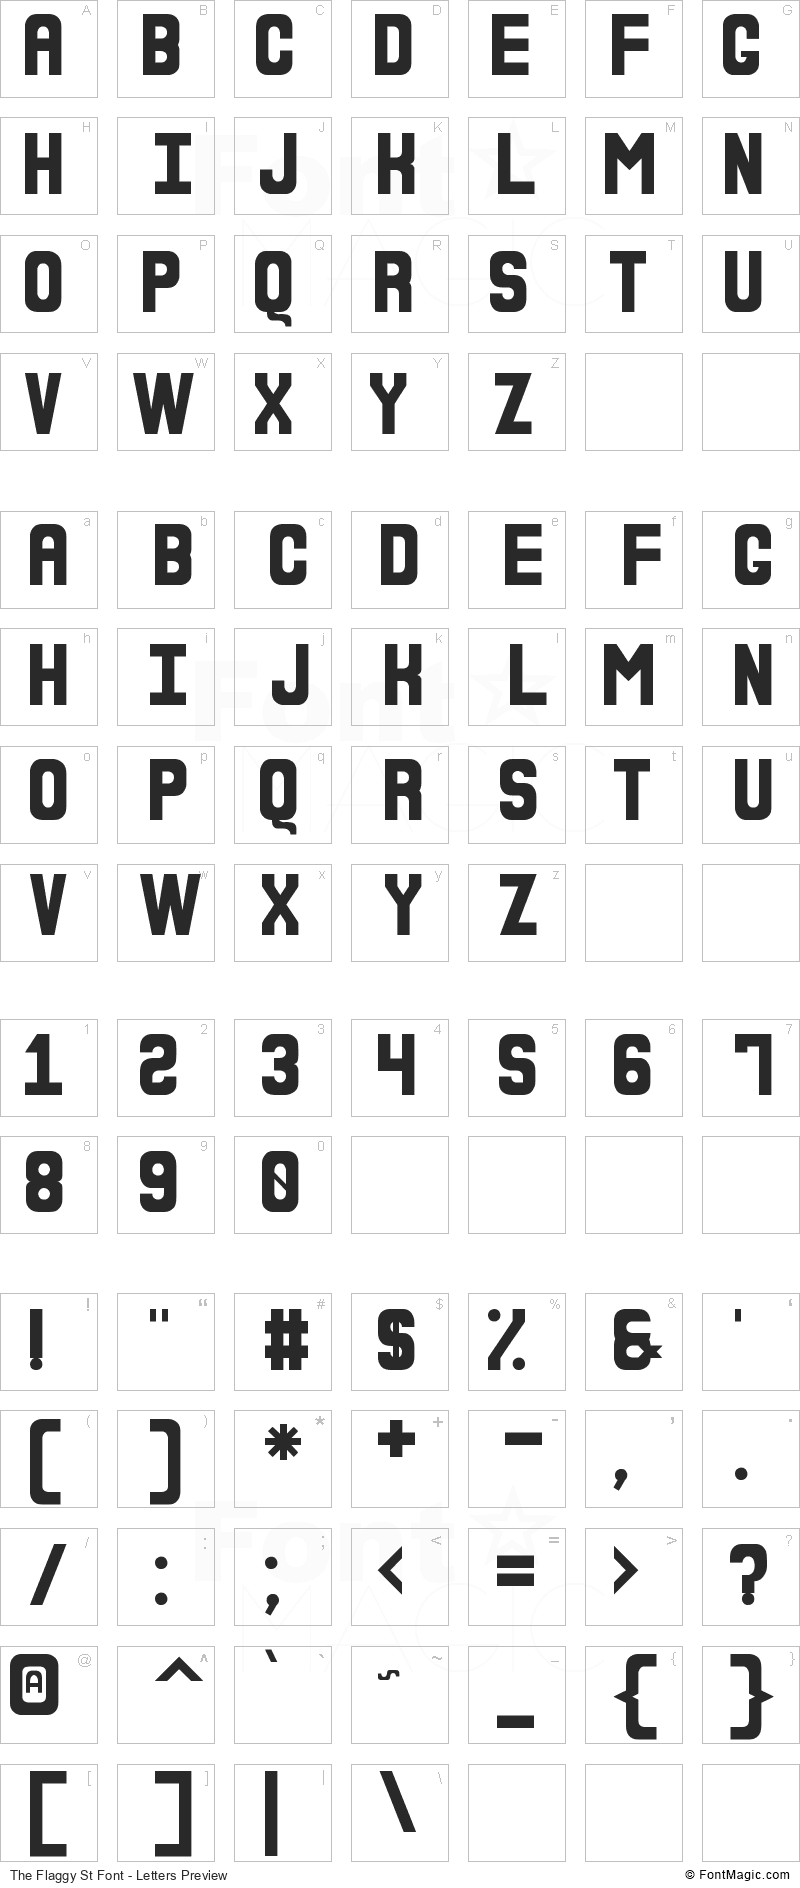 The Flaggy St Font - All Latters Preview Chart